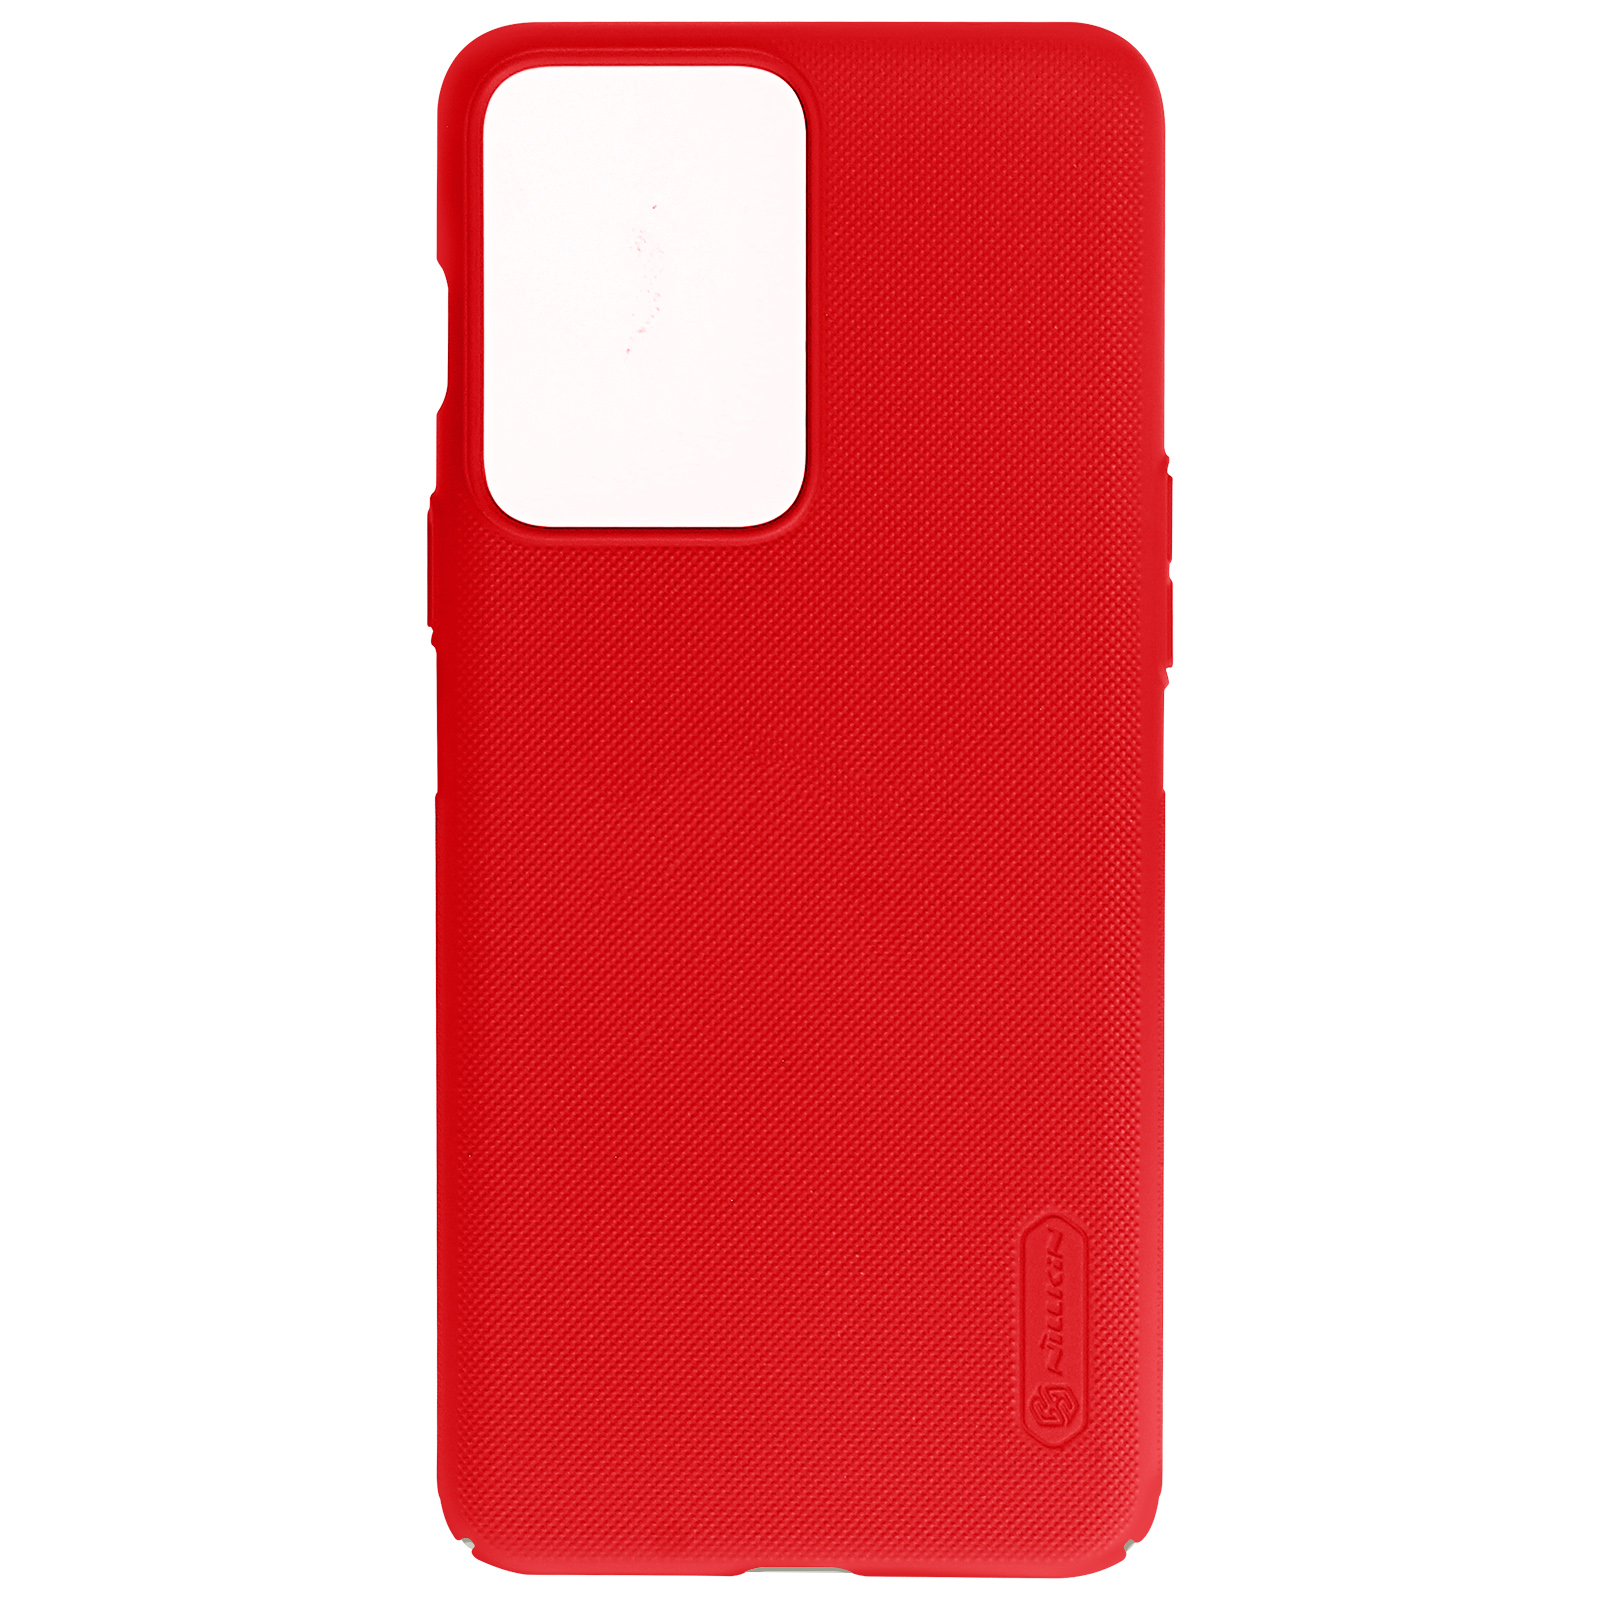 Backcover, Soft NILLKIN Series, Rot OnePlus, Touch Nord 2T,